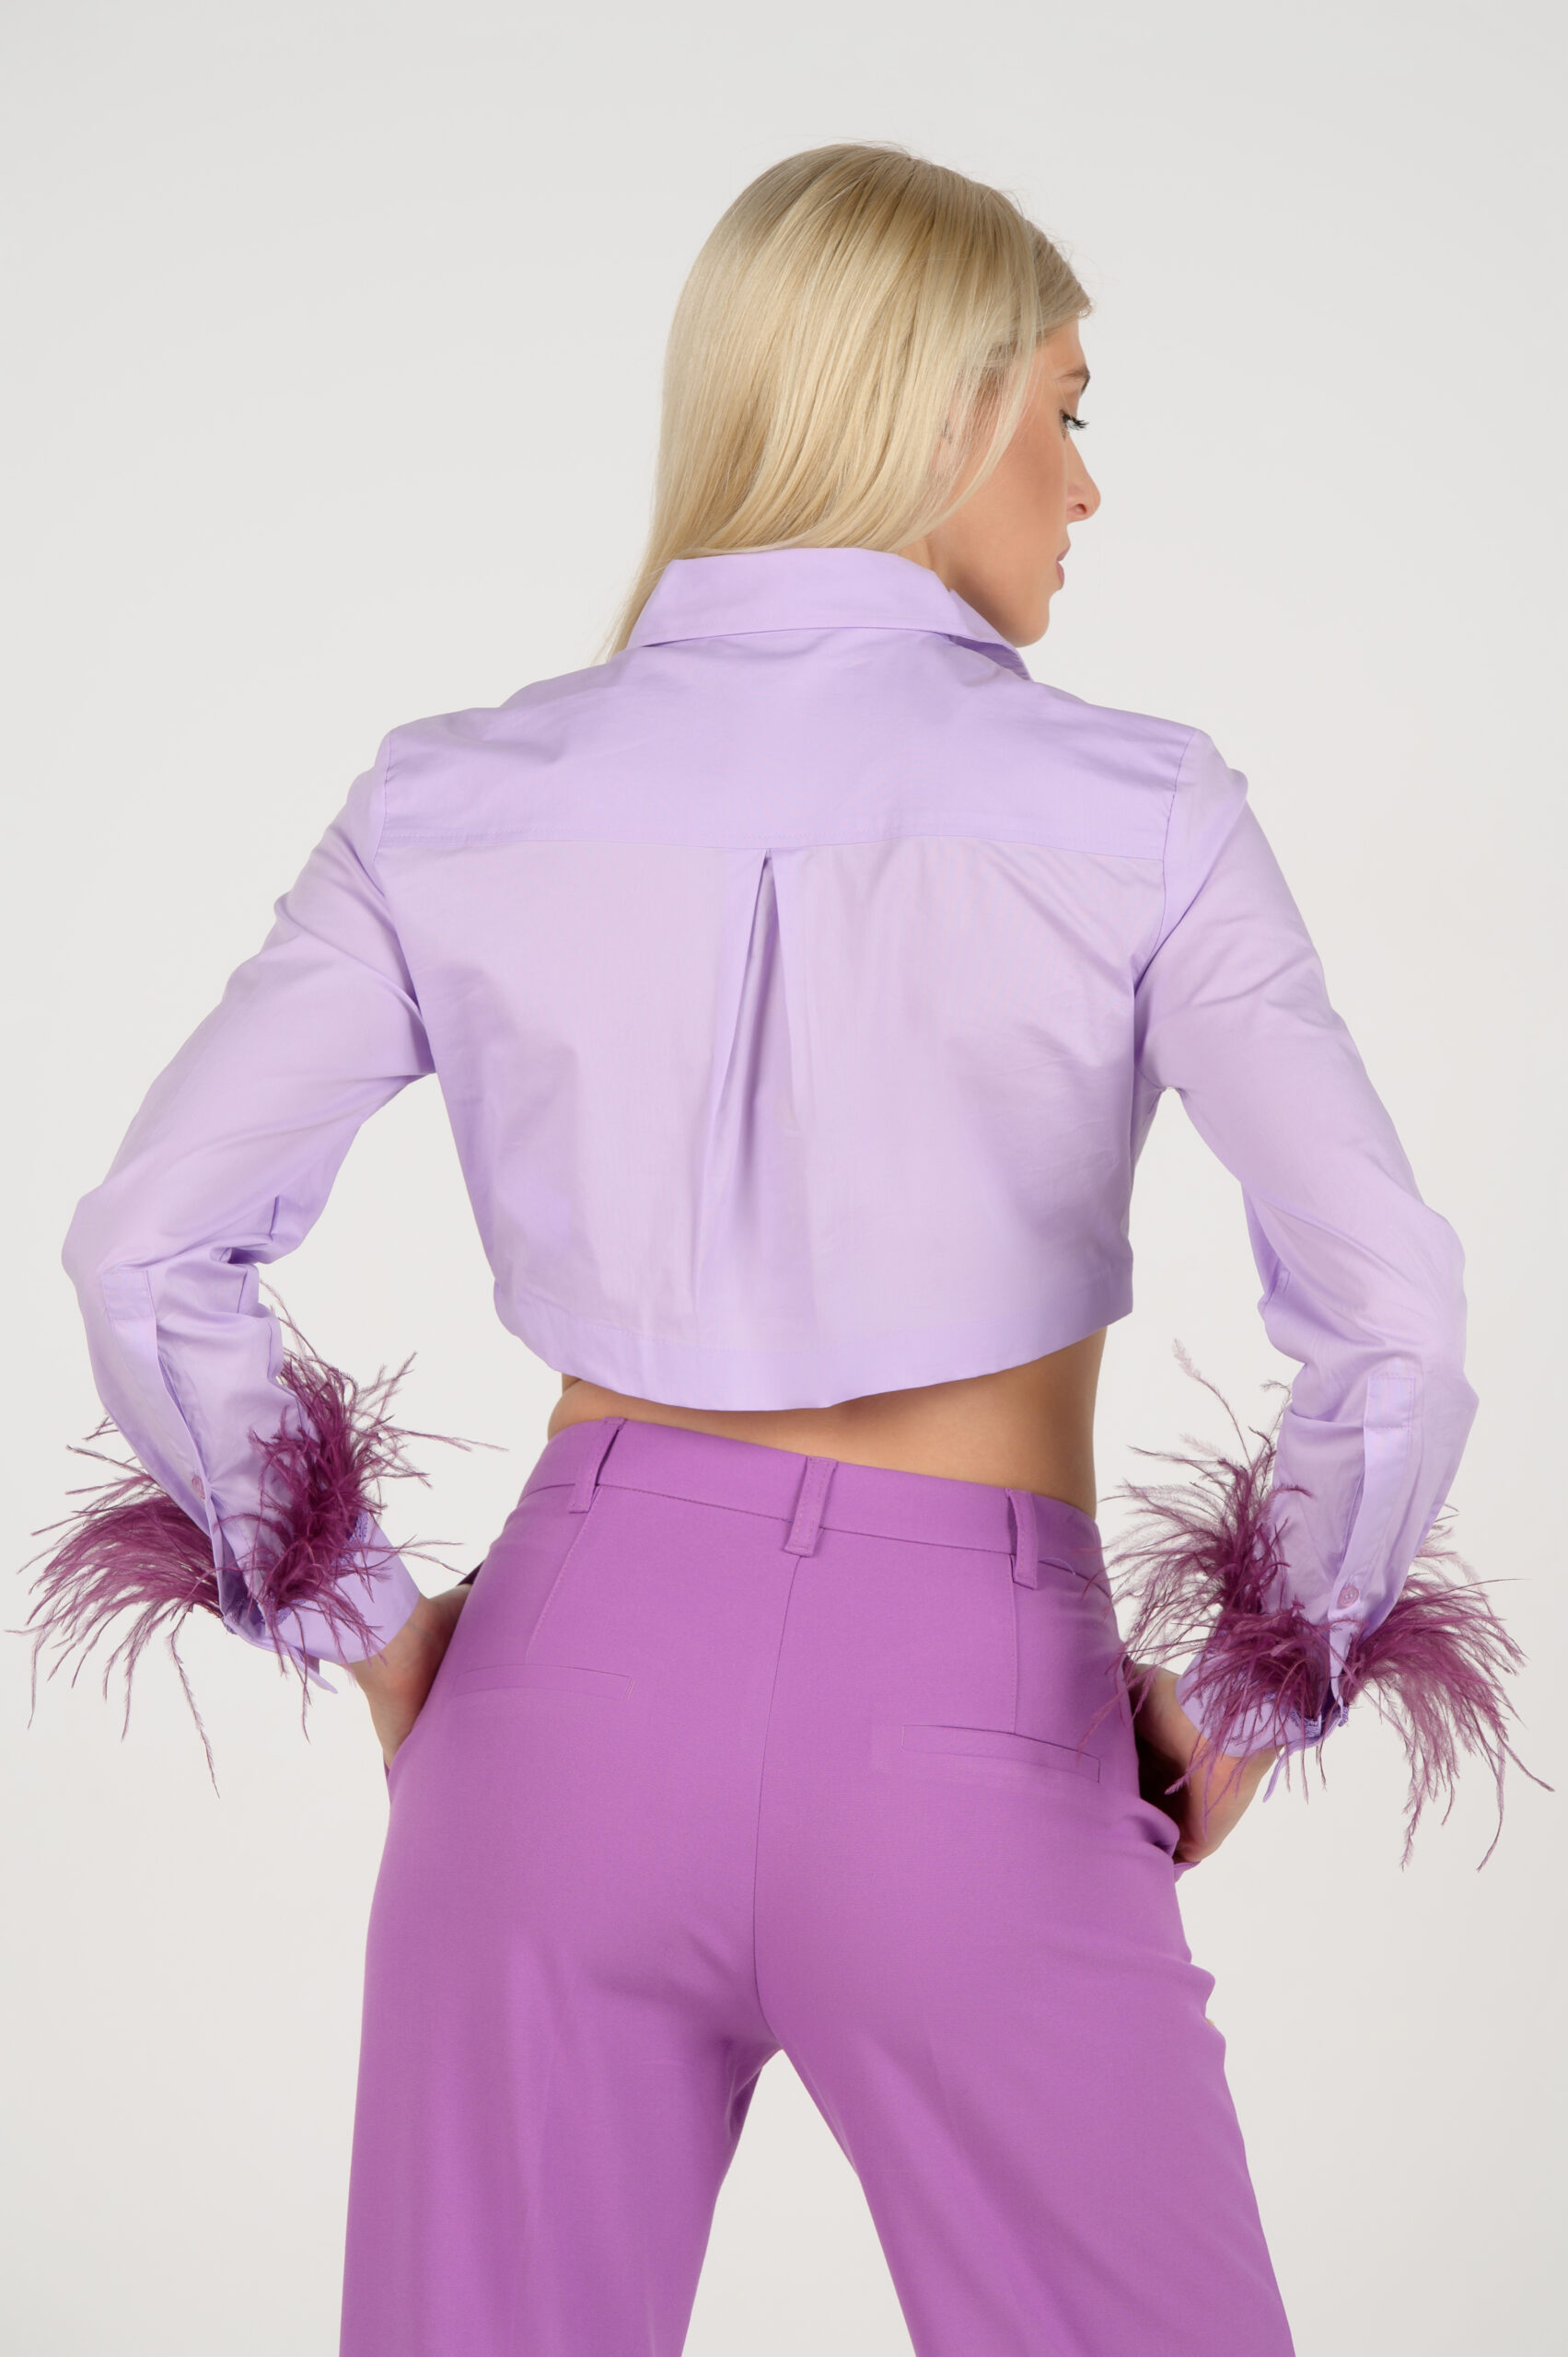 Cropped purple shirt with feathers on the sleeves